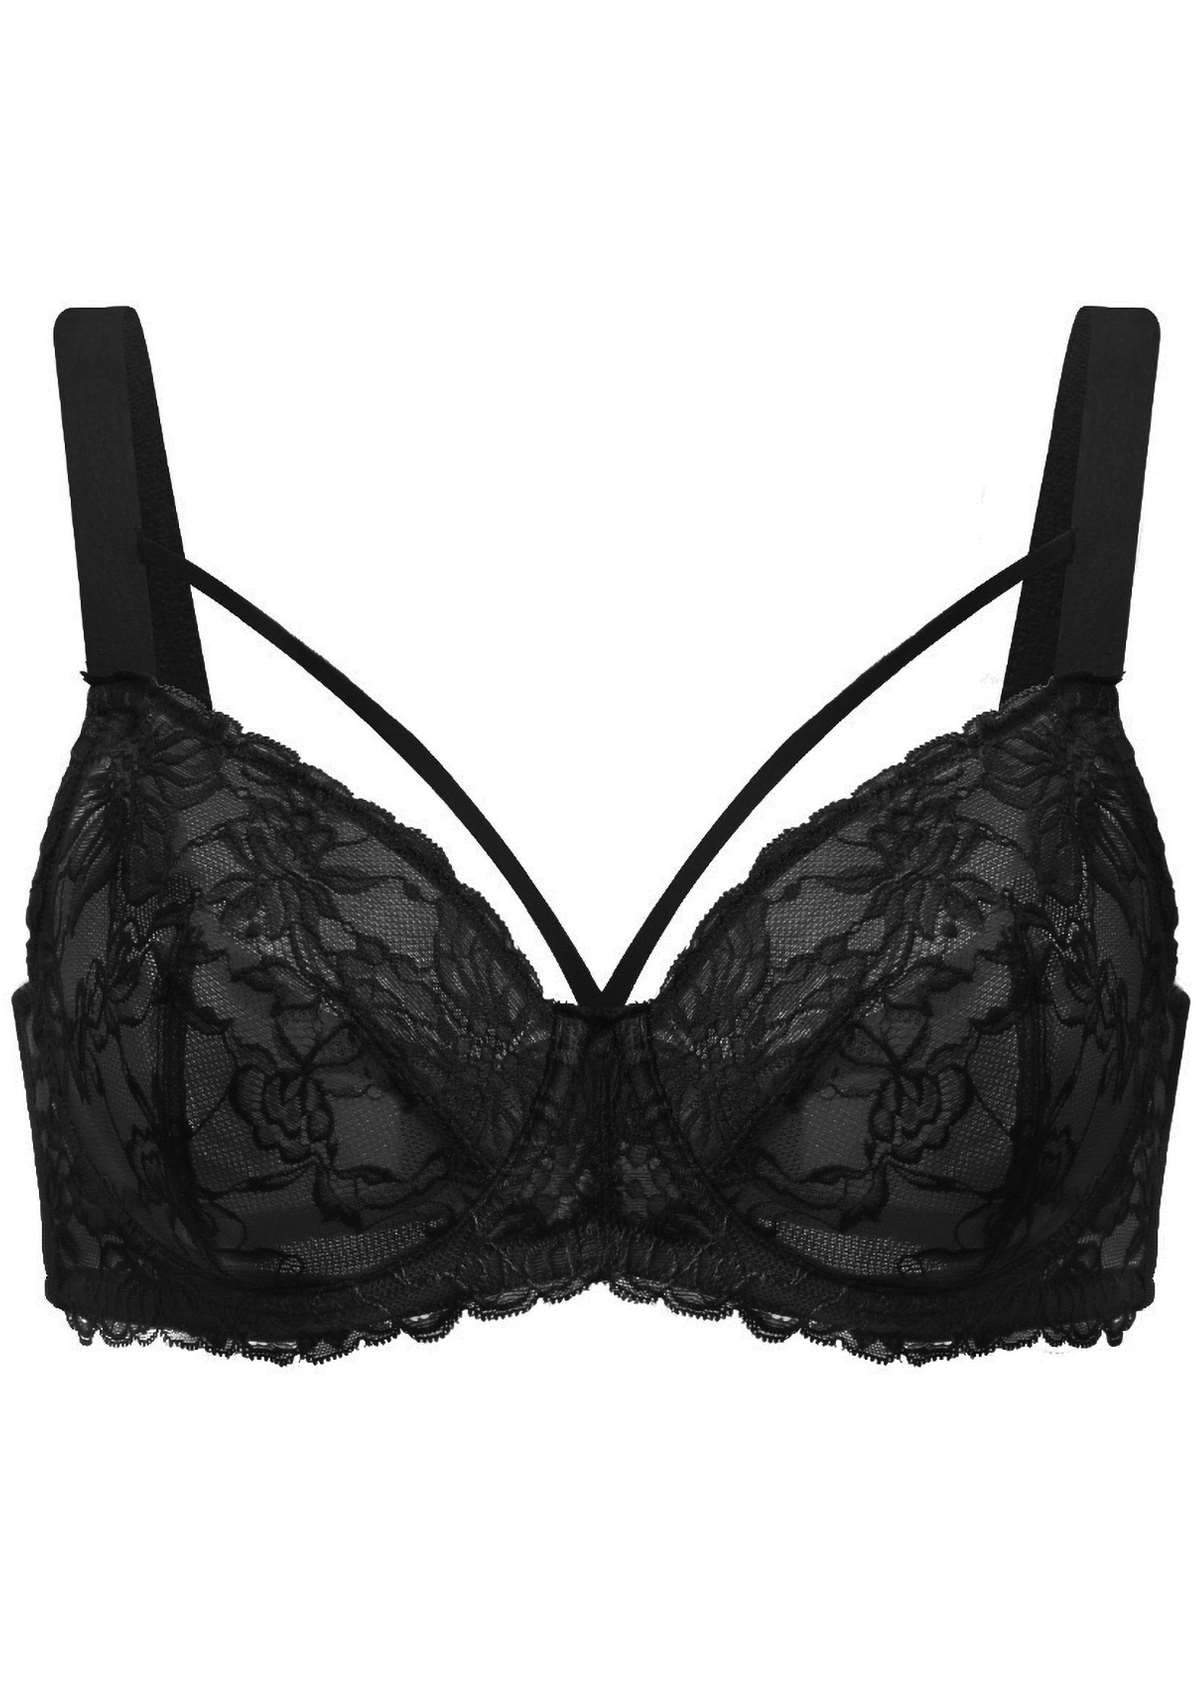 HSIA Pretty In Petals Bra - Plus Size Lingerie For Comfrot And Support - Black / 32 / H